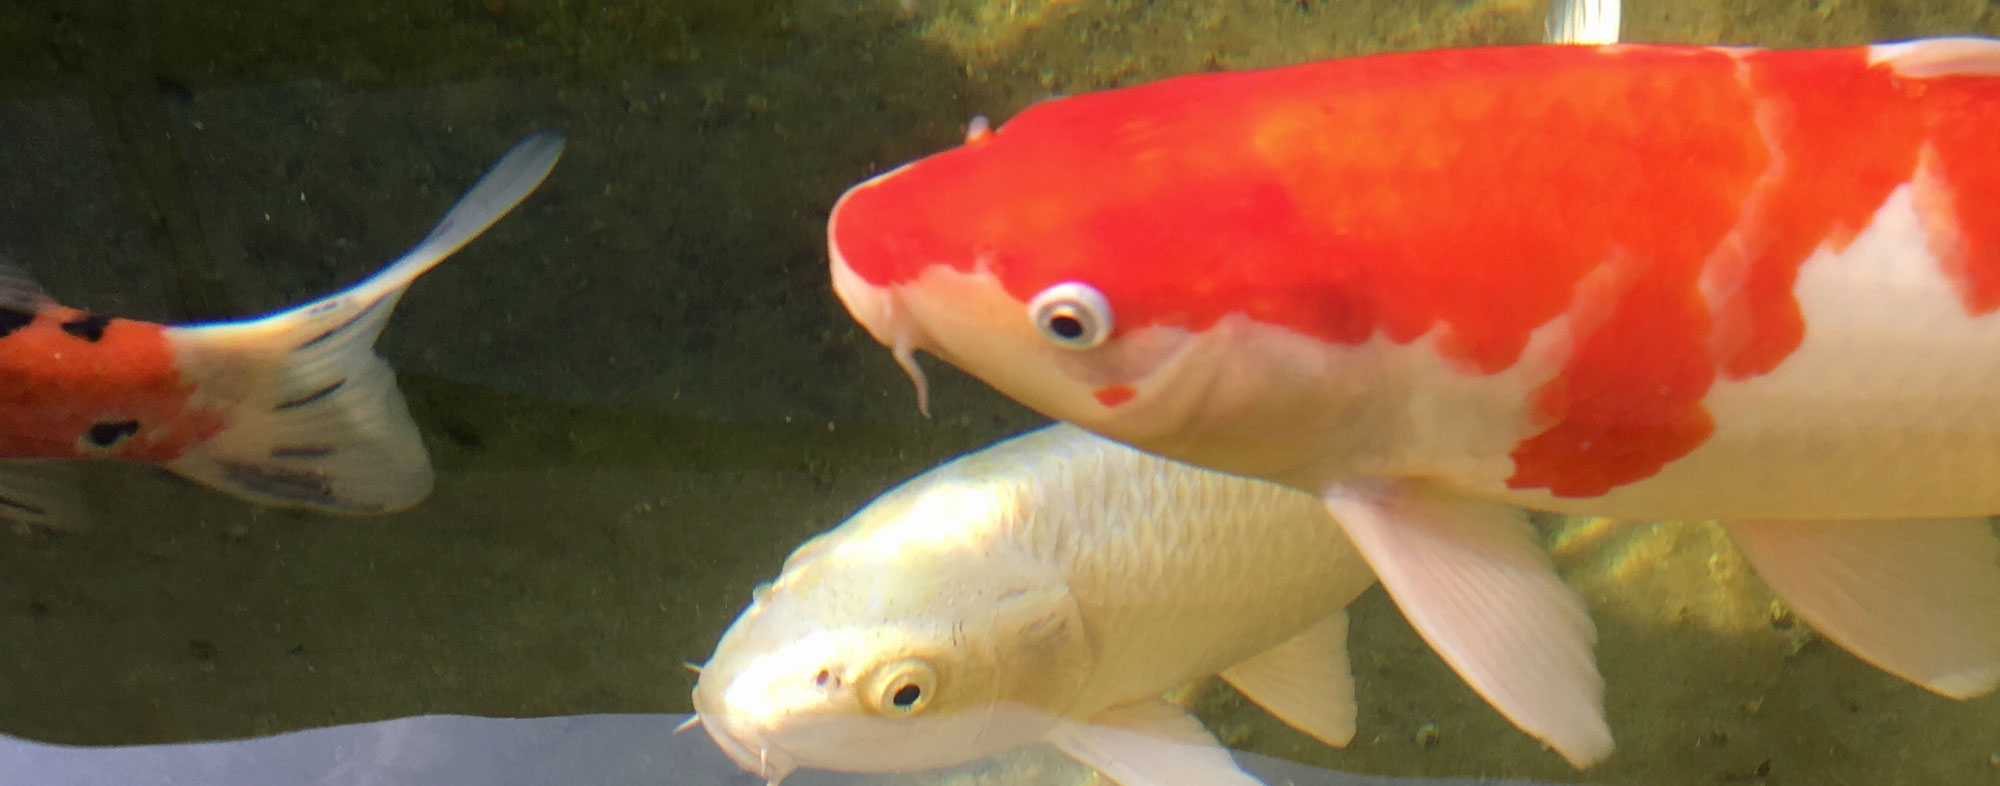 A pair of pet fish who may be vulnerable to outdoor predators